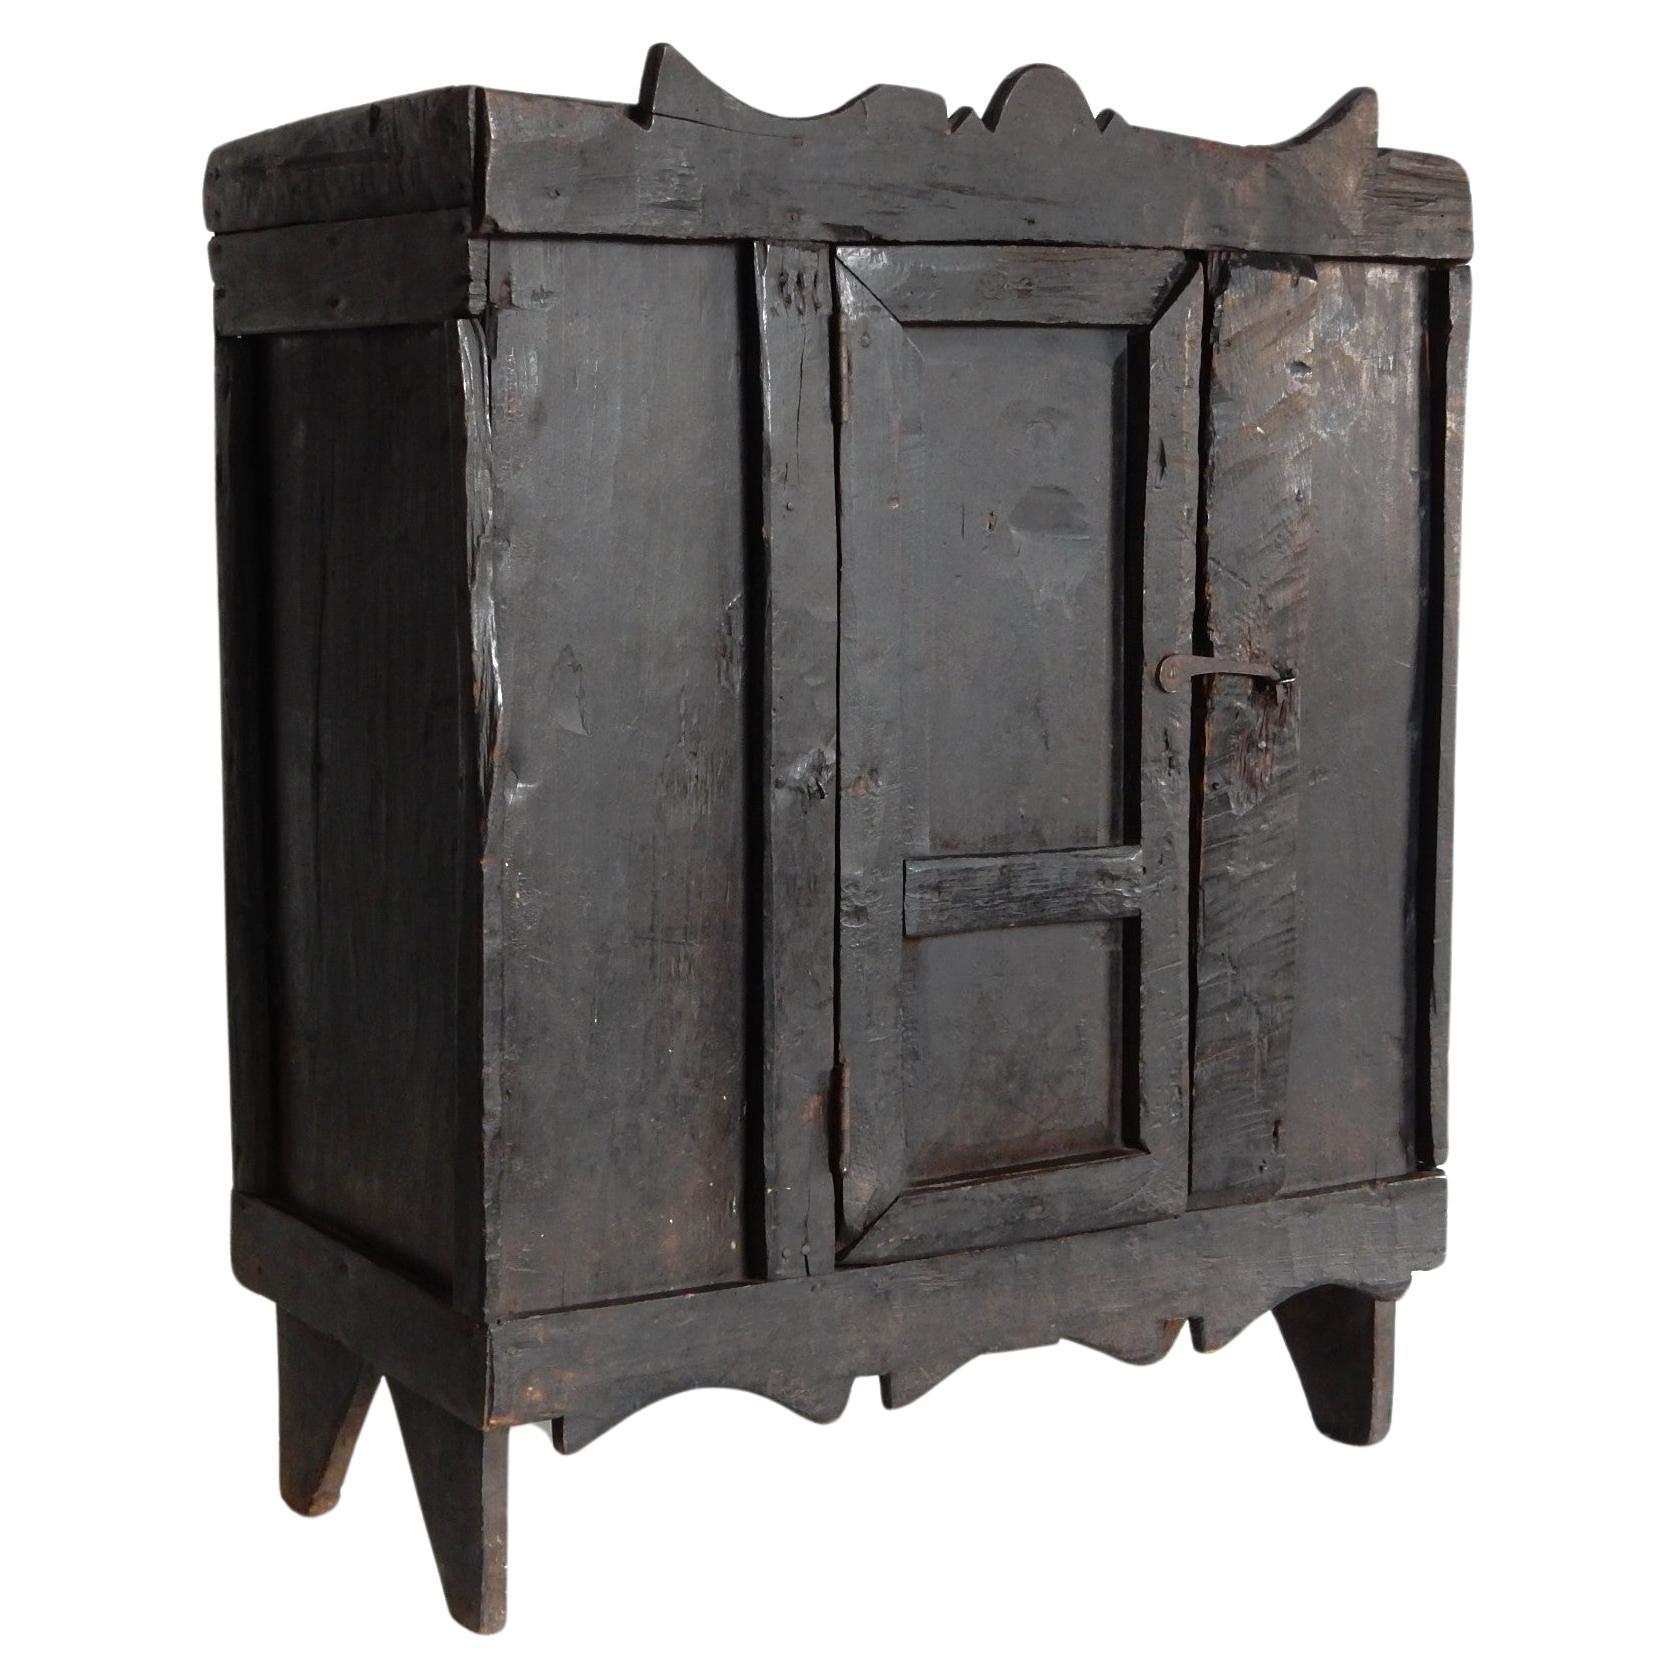 French Travail Populaire Rustic Wabi Sabi Cabinet, early 19th Century For Sale